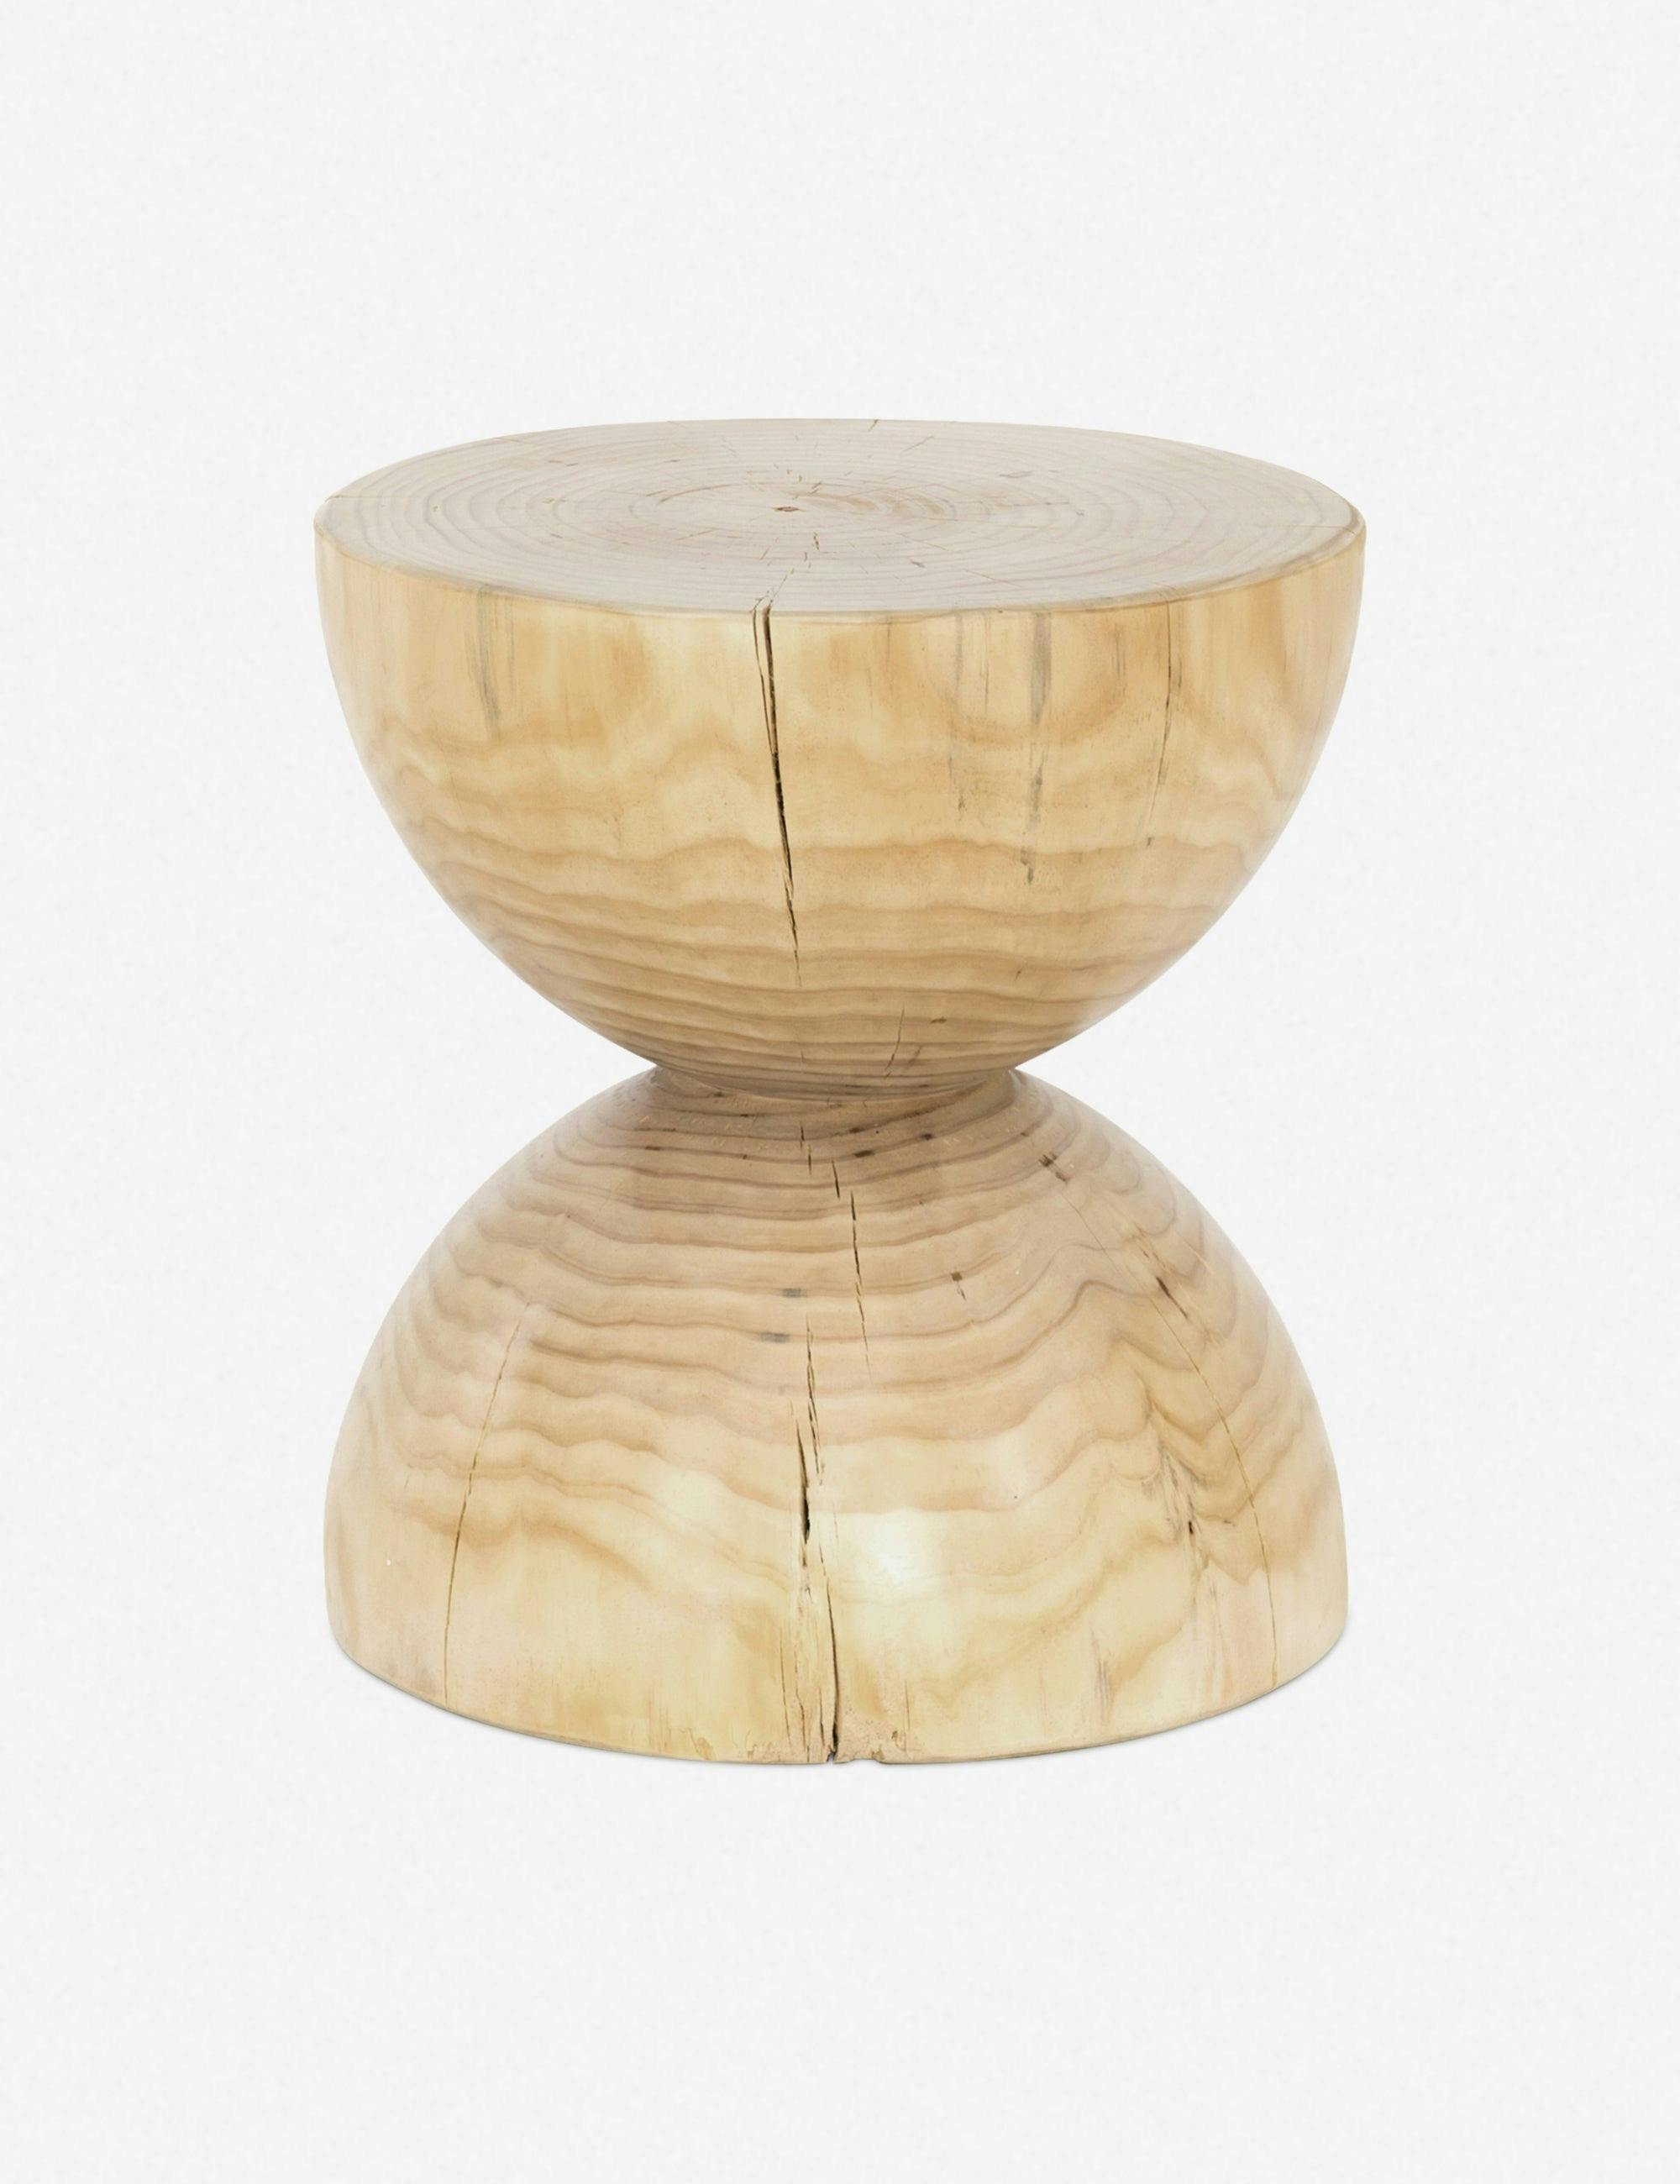 Contemporary Pine Wood Round Side Table, 15.5" Brown